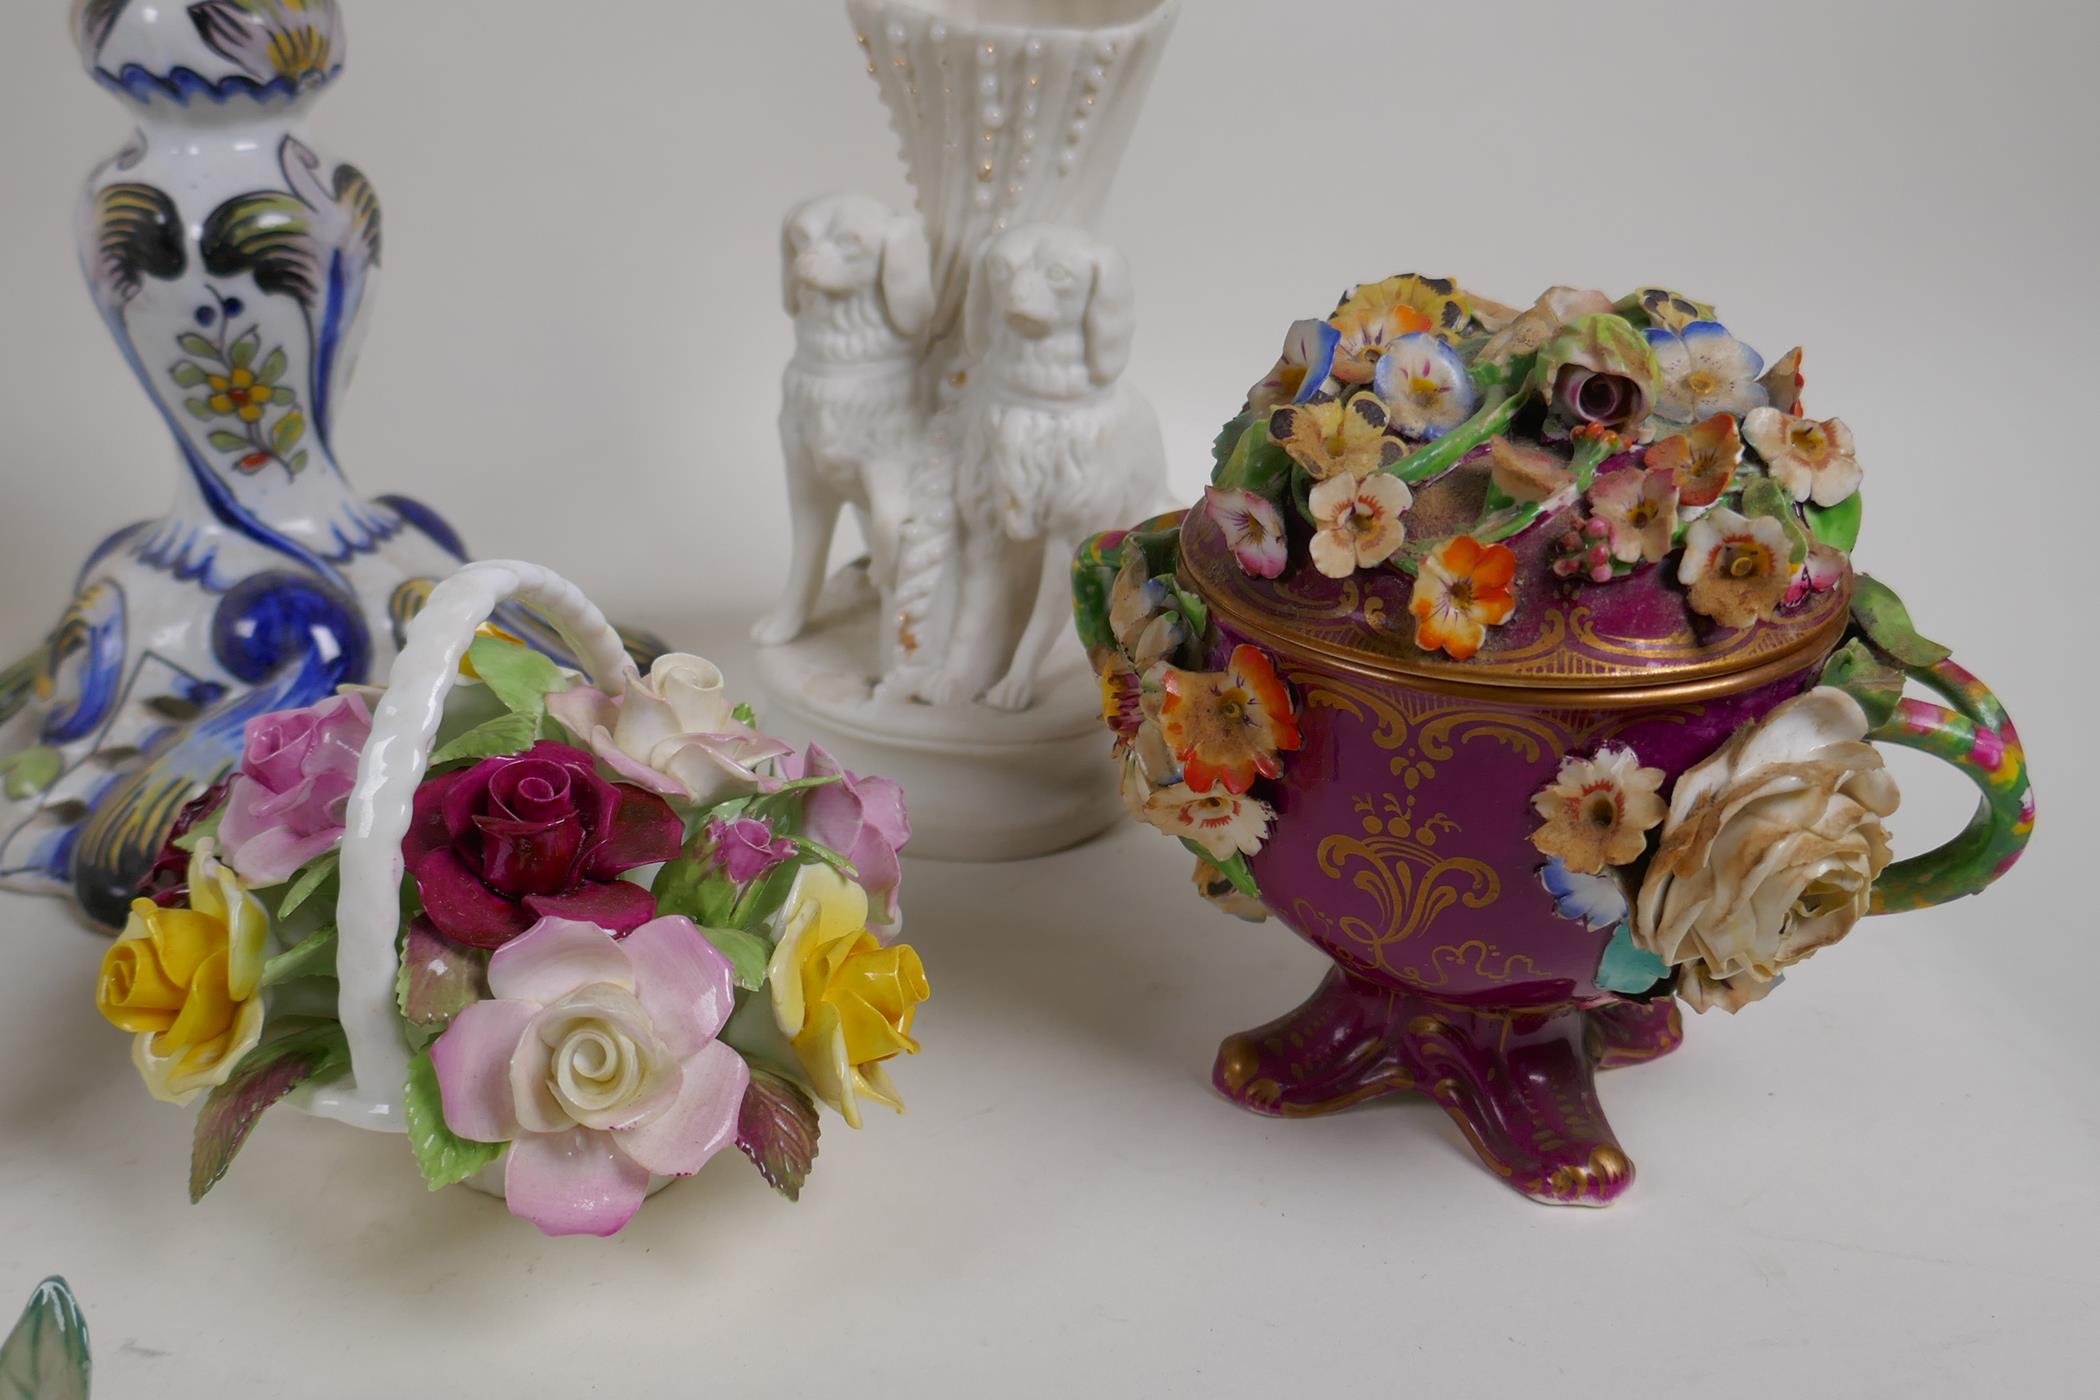 A quantity of C19th and early C20th British and Continental porcelain items including cups, saucers, - Image 8 of 9